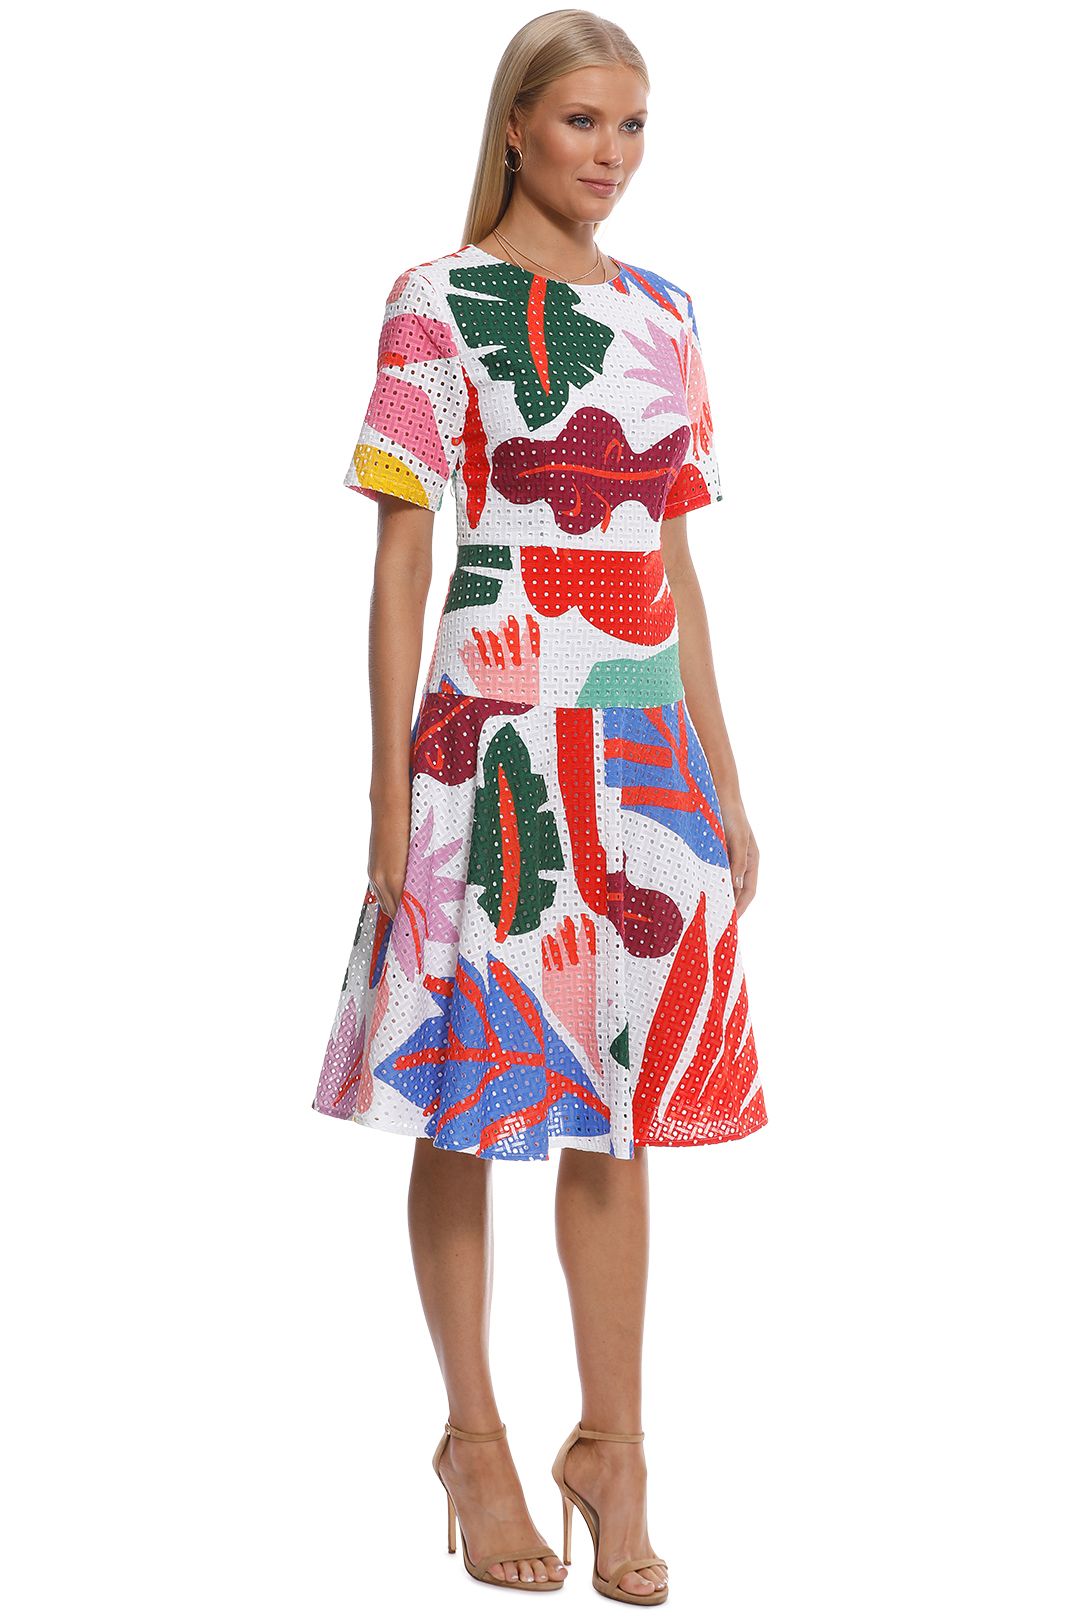 Frondly Face Dress by Gorman for Rent | GlamCorner